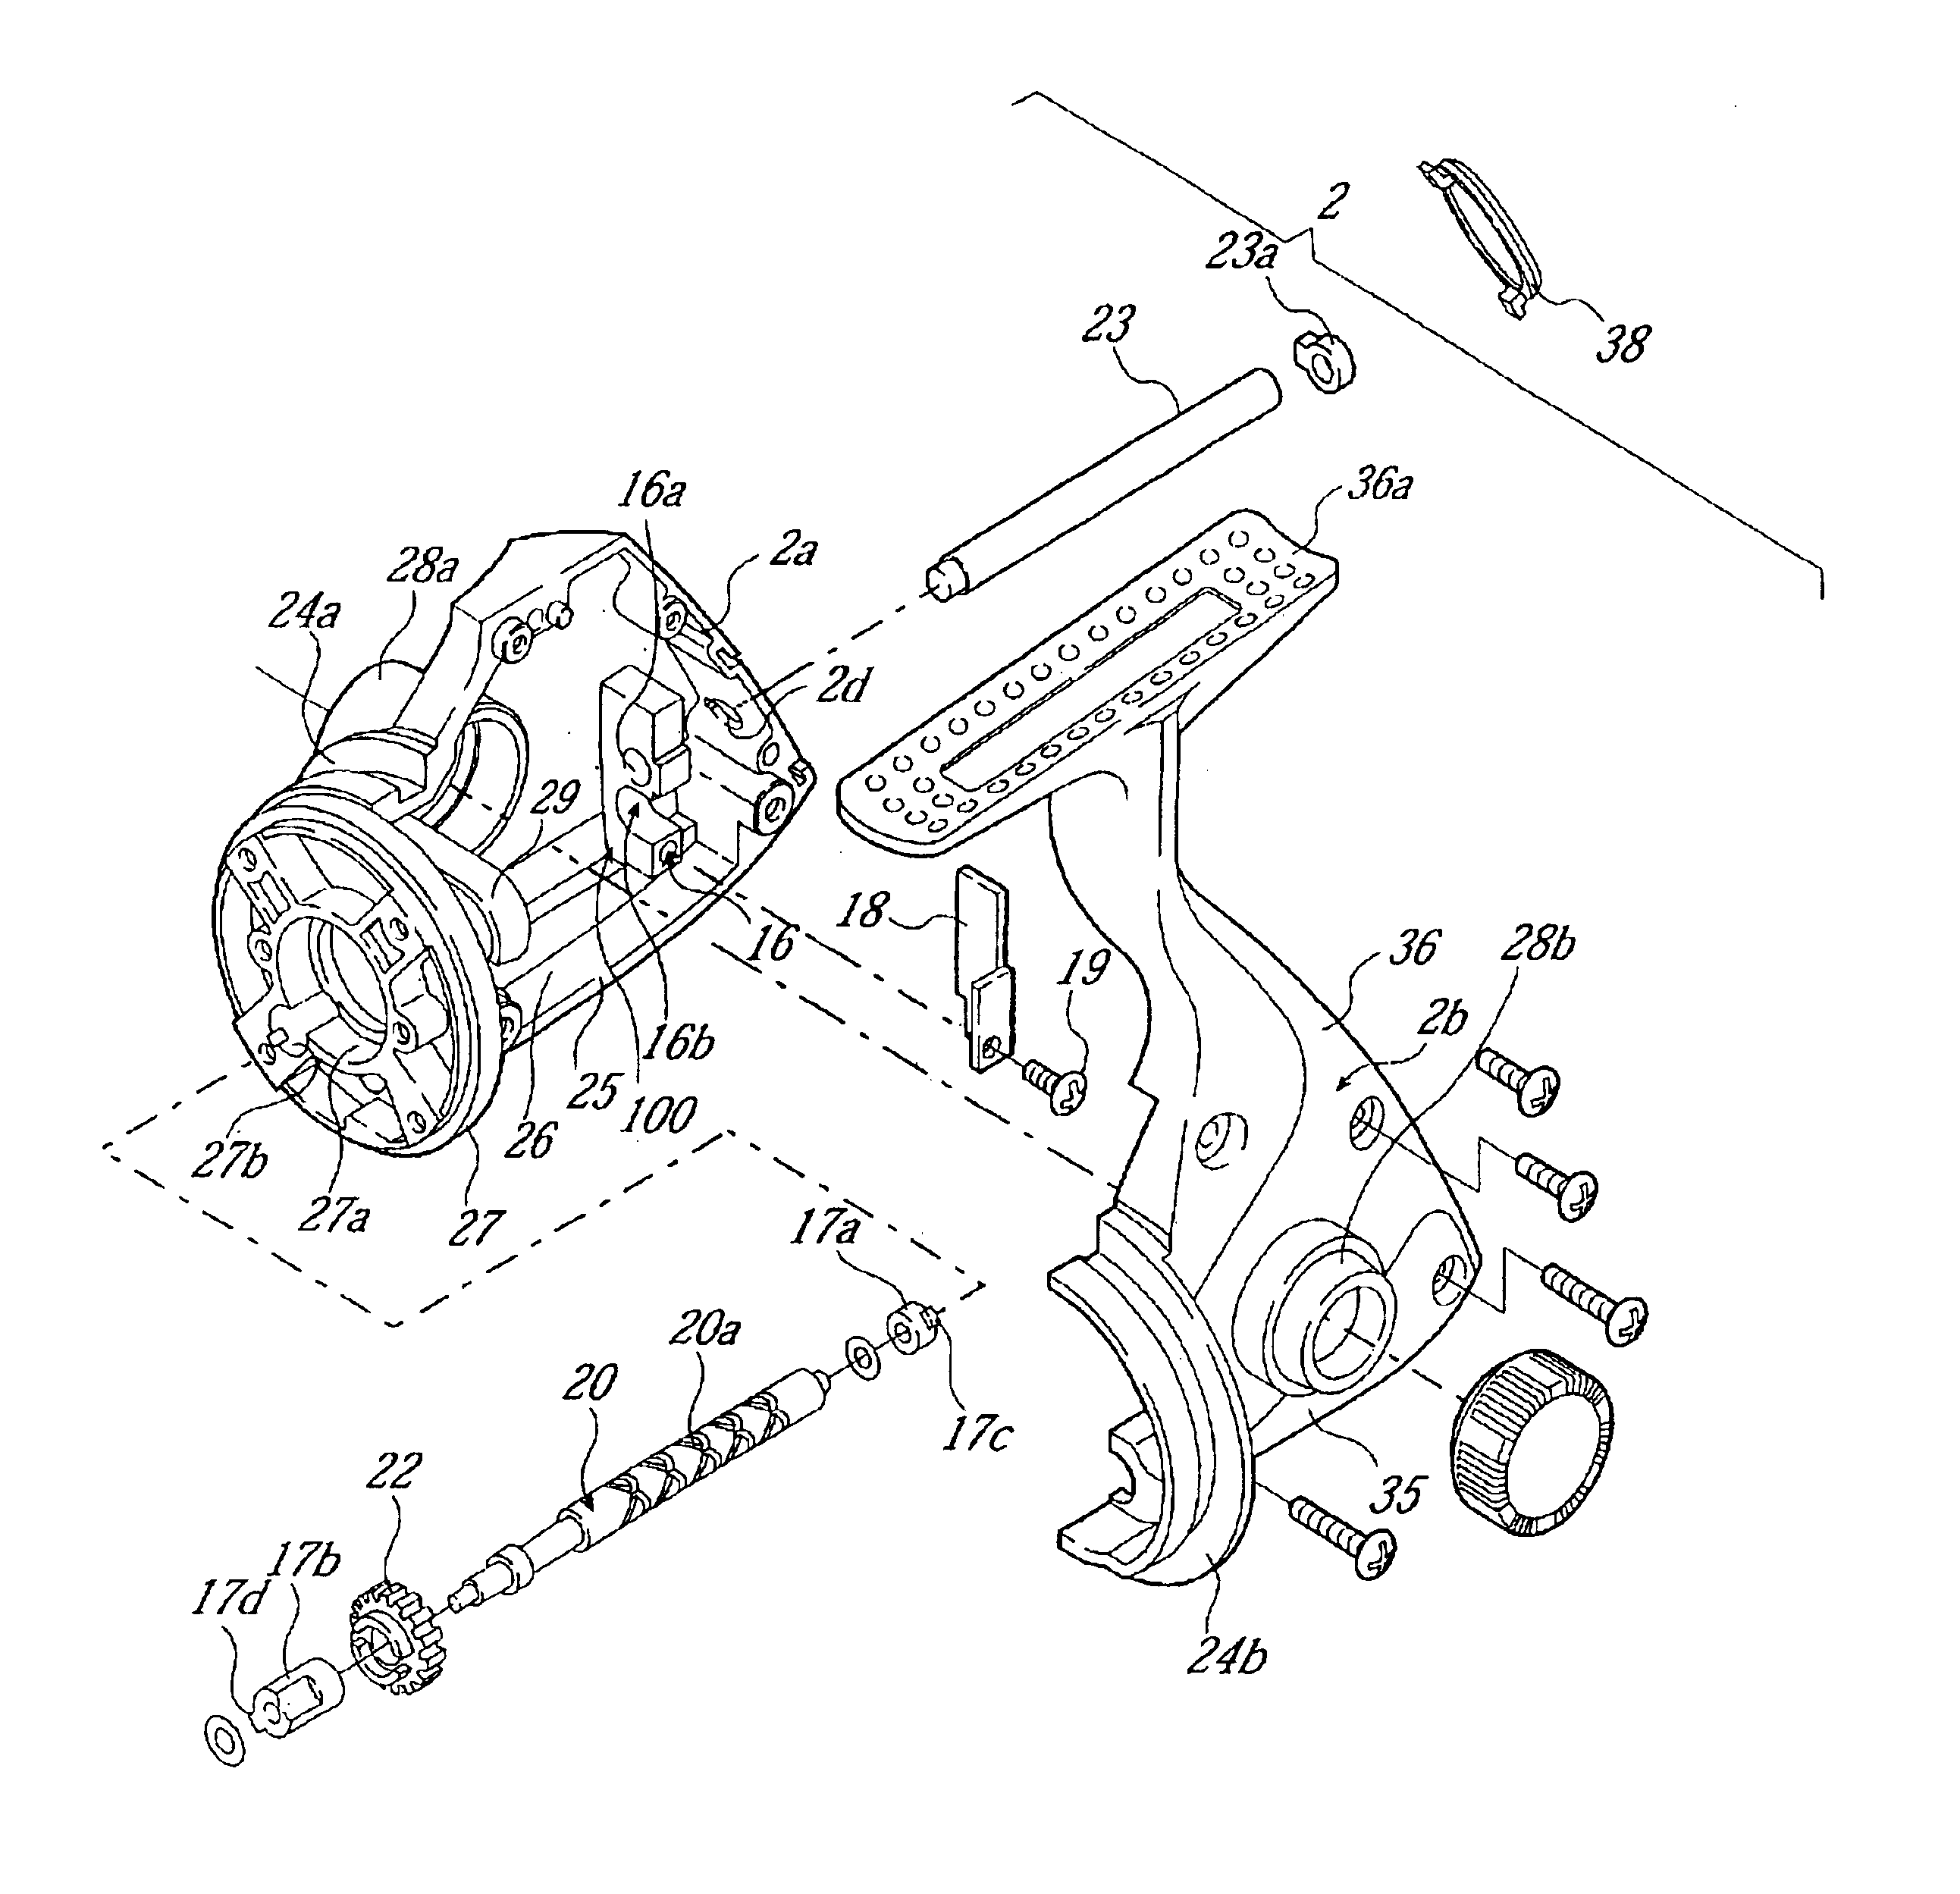 Worm shaft attachment structure for spinning reel